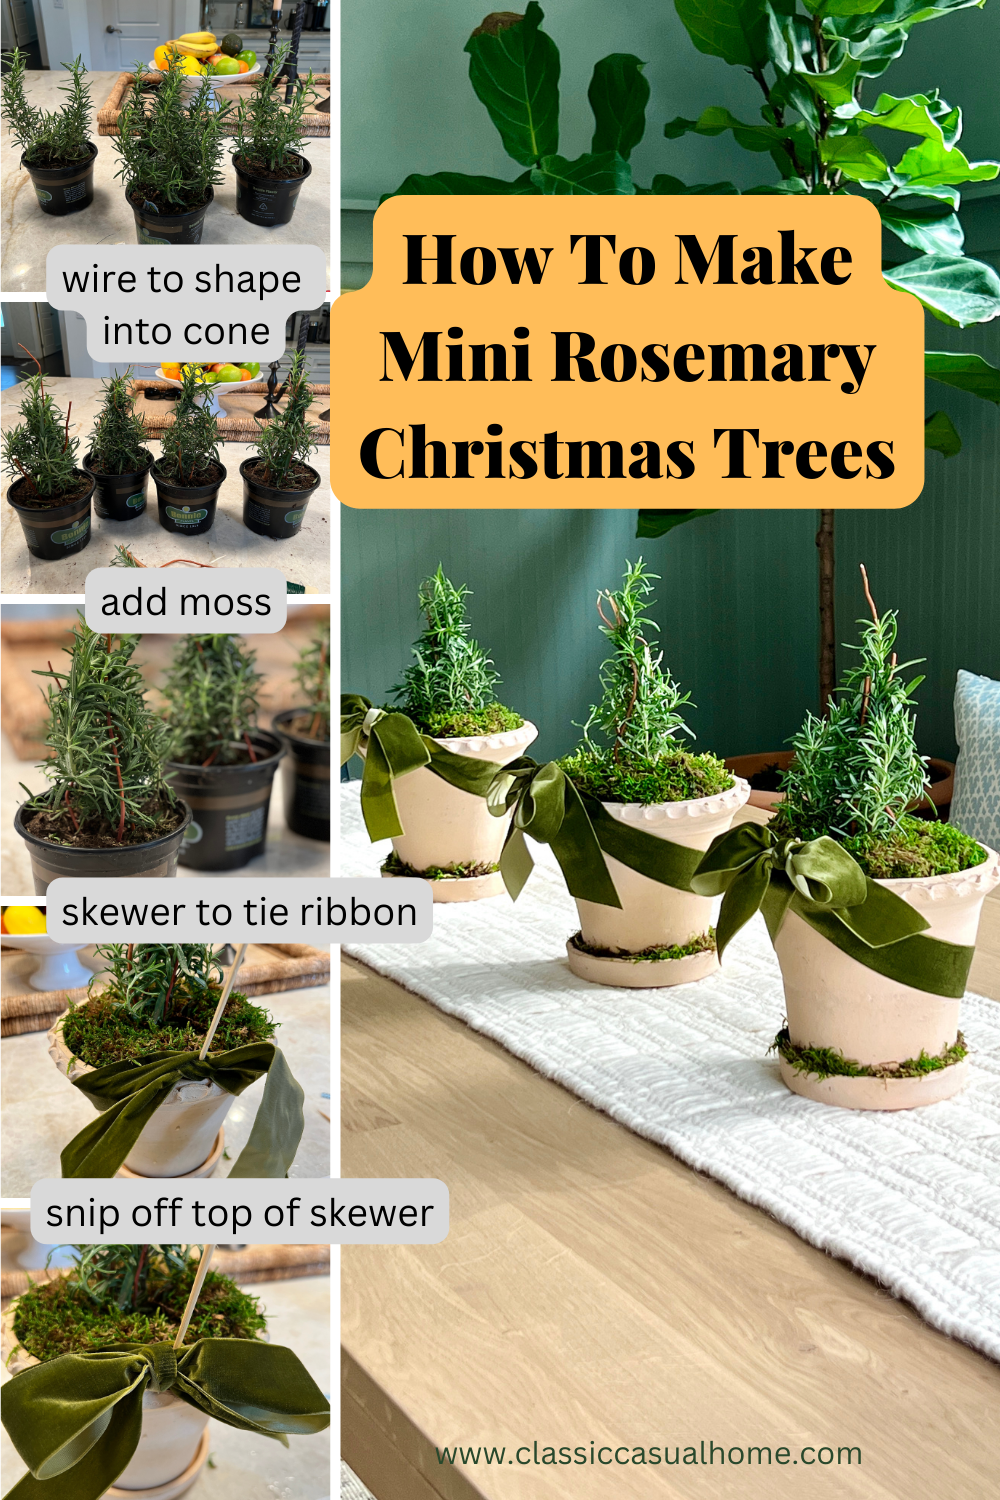 how to make little rosemary trees